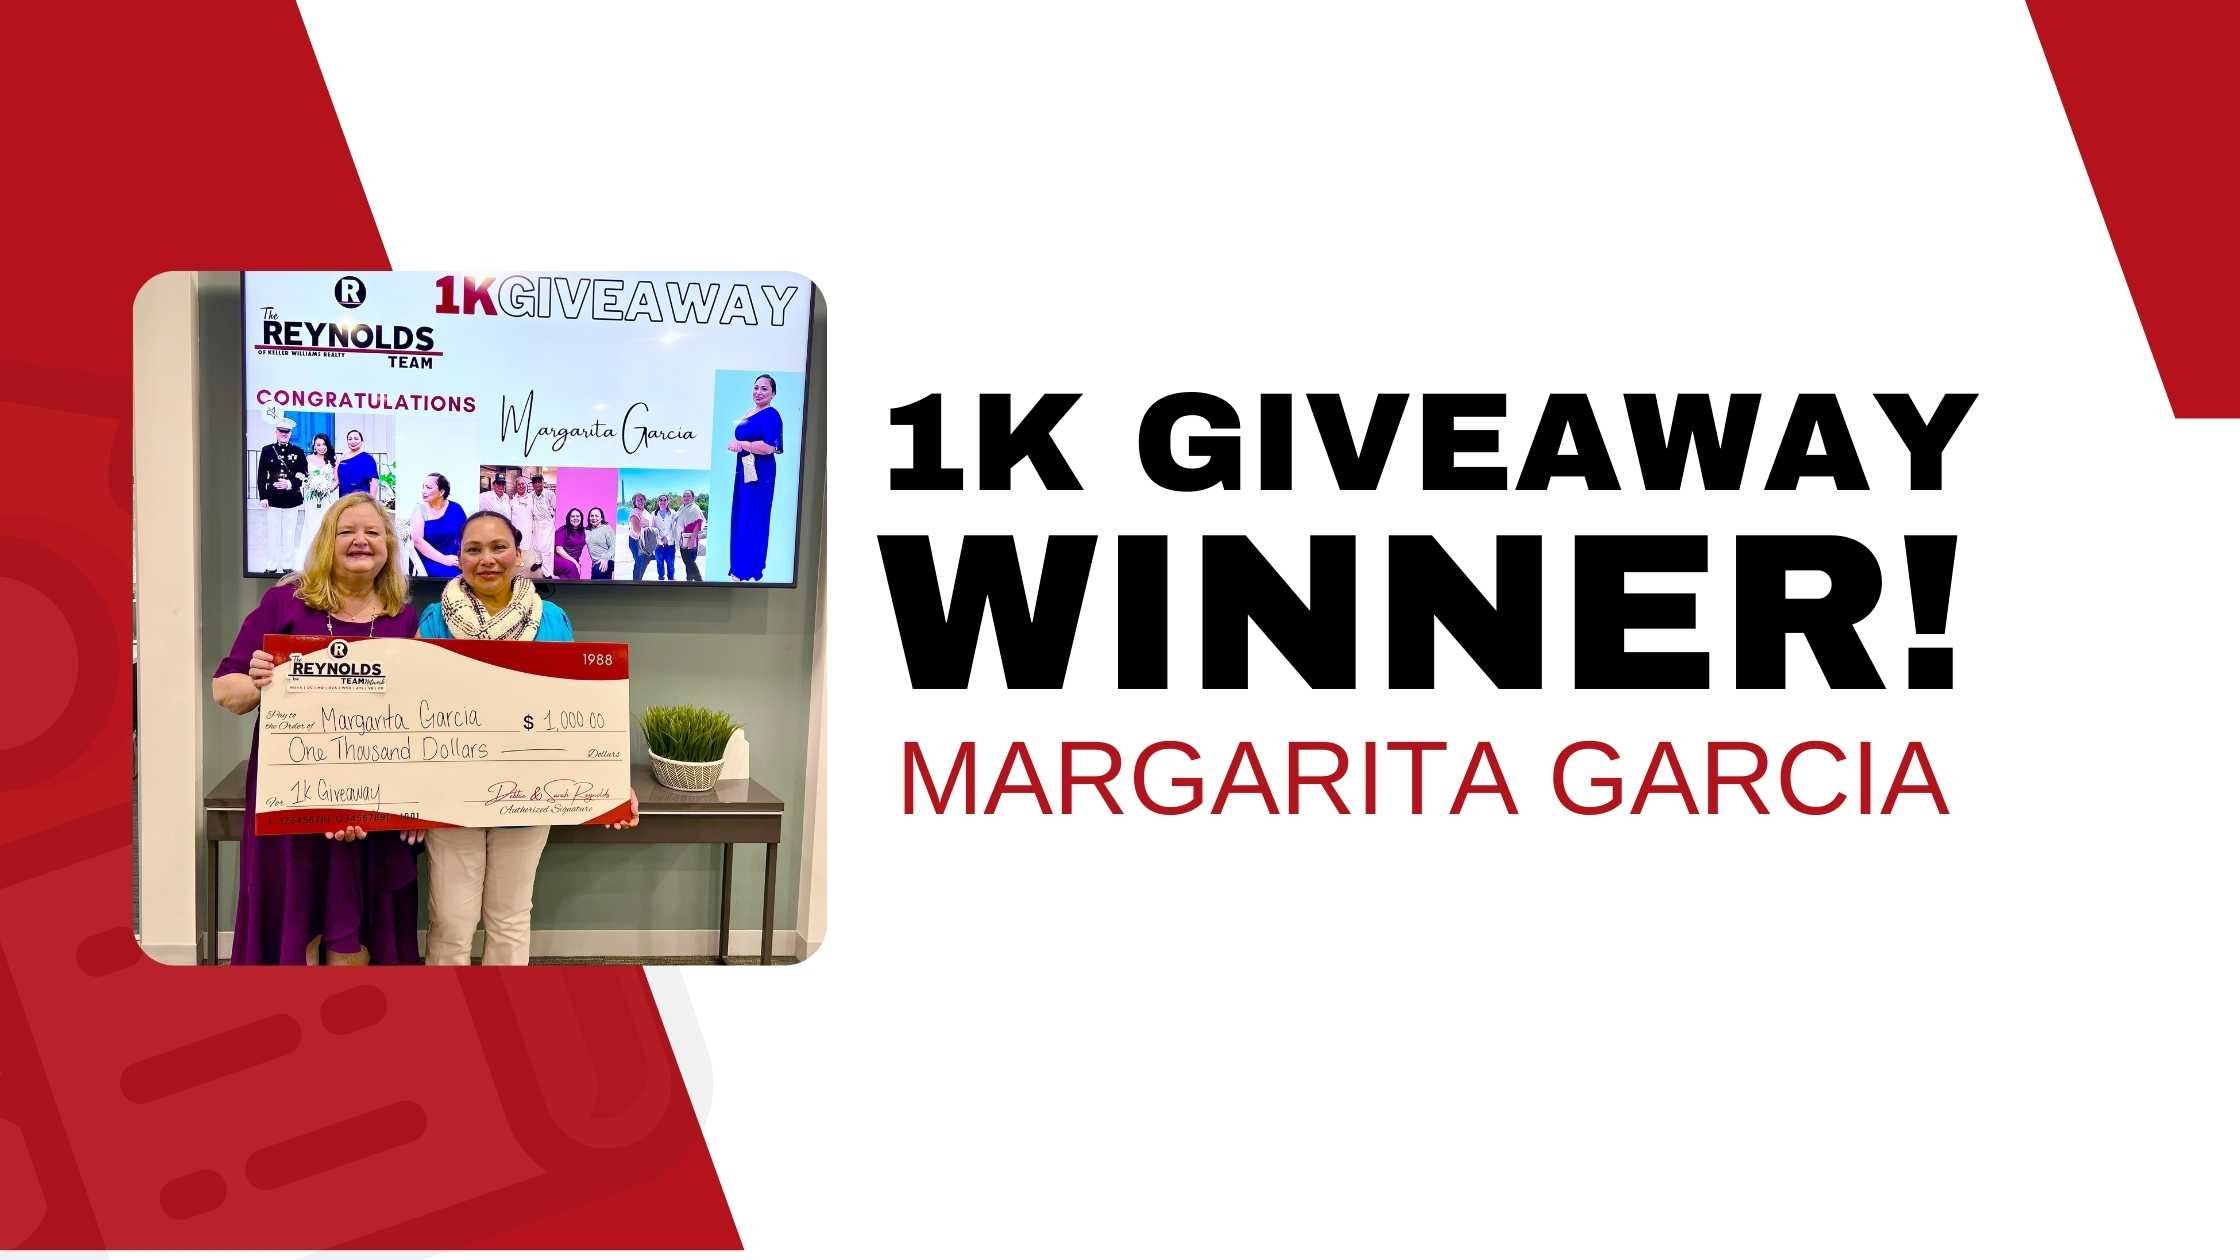 Congrats to Margarita, our $1K Giveaway Winner!